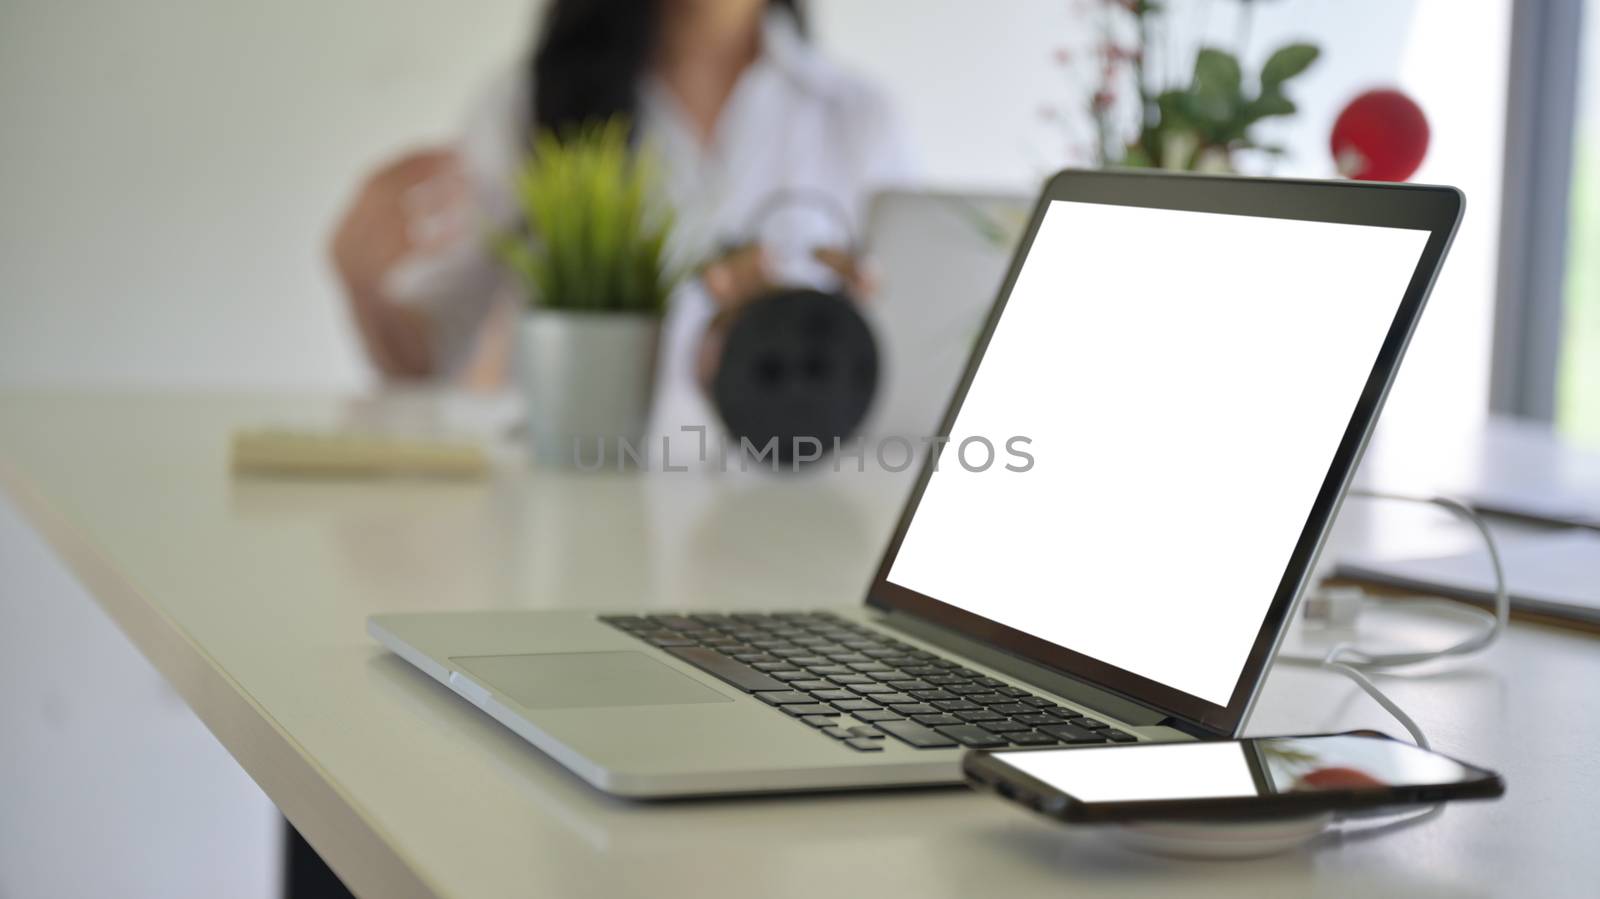 Laptop blank screen and smartphone on wireless charger with background people are working blurred.